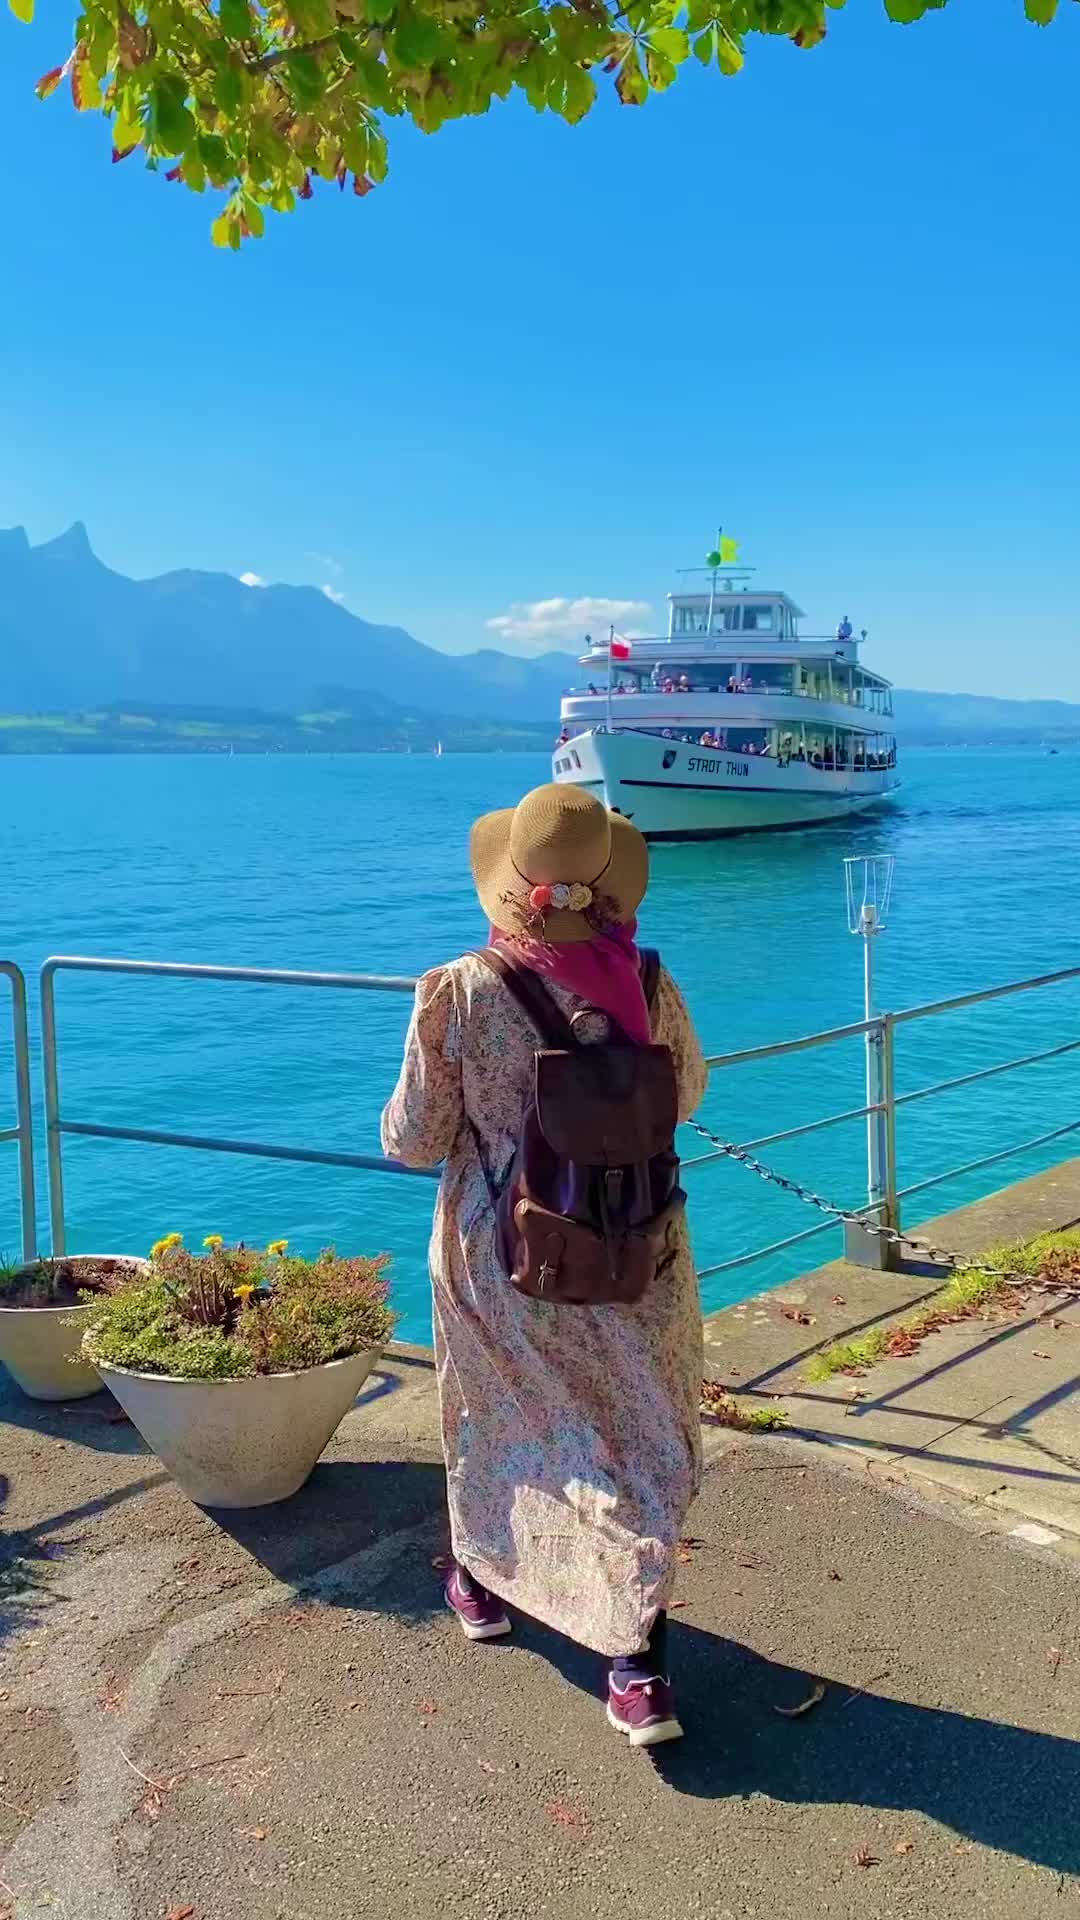 Free Boat Trip in Lake Thun with Swiss Travel Pass